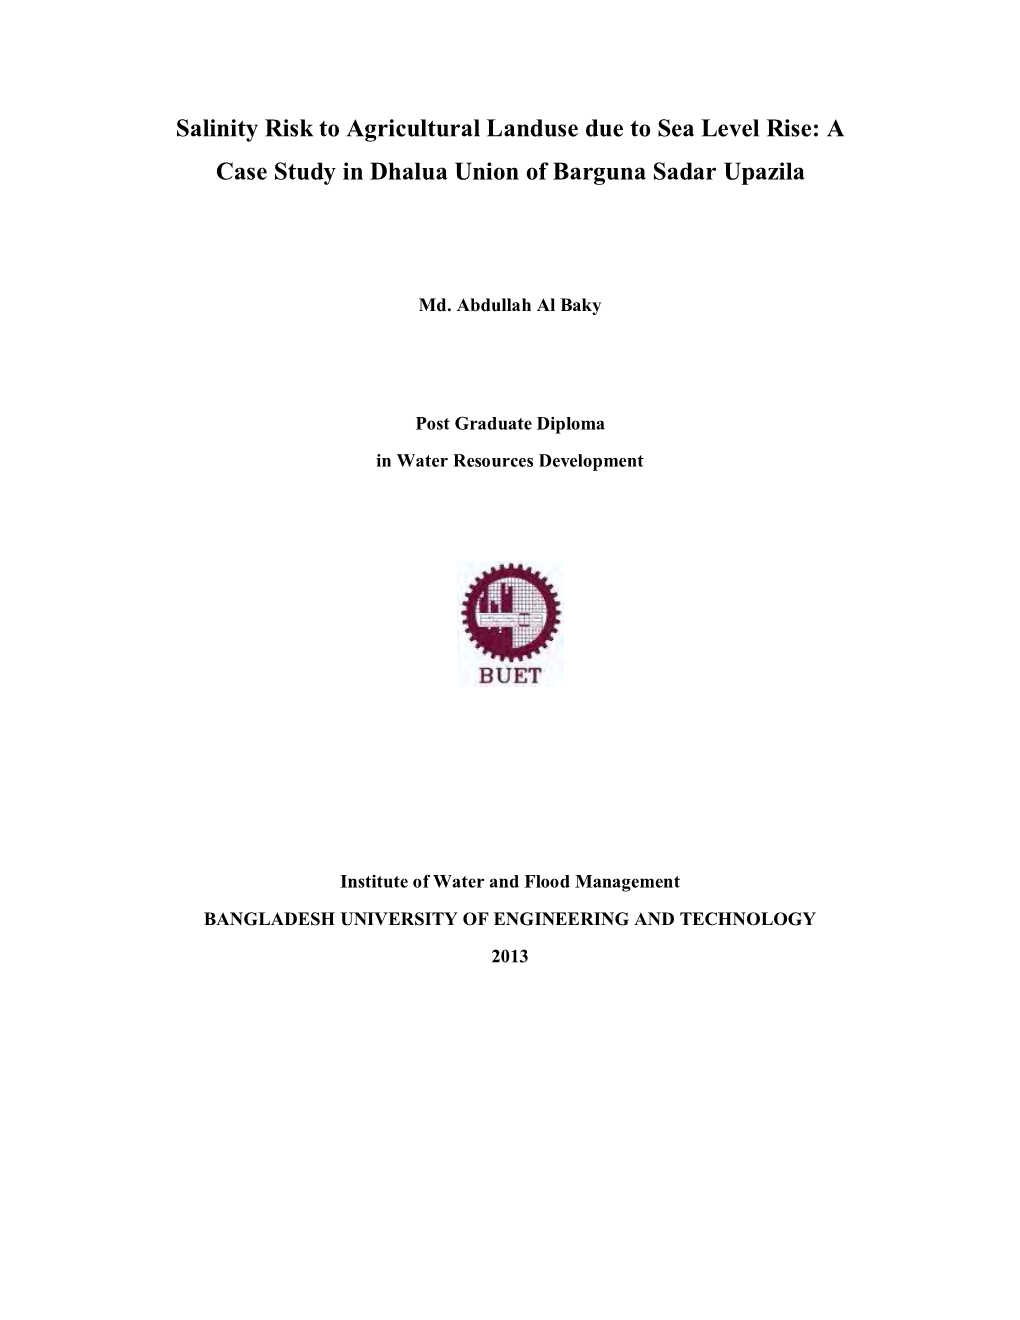 Salinity Risk to Agricultural Landuse Due to Sea Level Rise: a Case Study in Dhalua Union of Barguna Sadar Upazila’ Submitted by Md